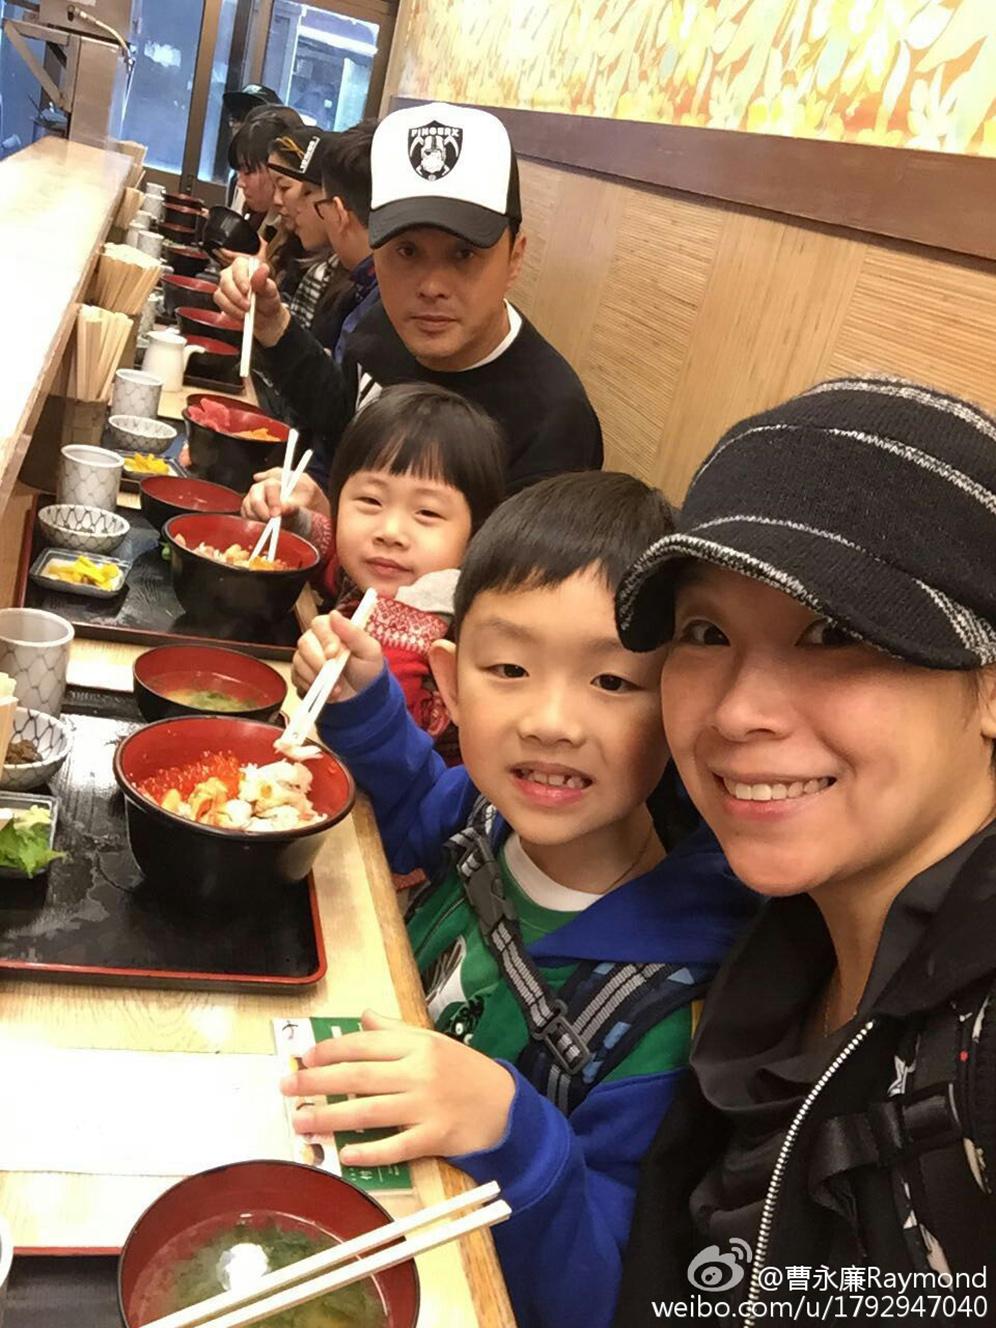 Asian E-News Portal: Raymond Cho and his family went to Japan for holidays